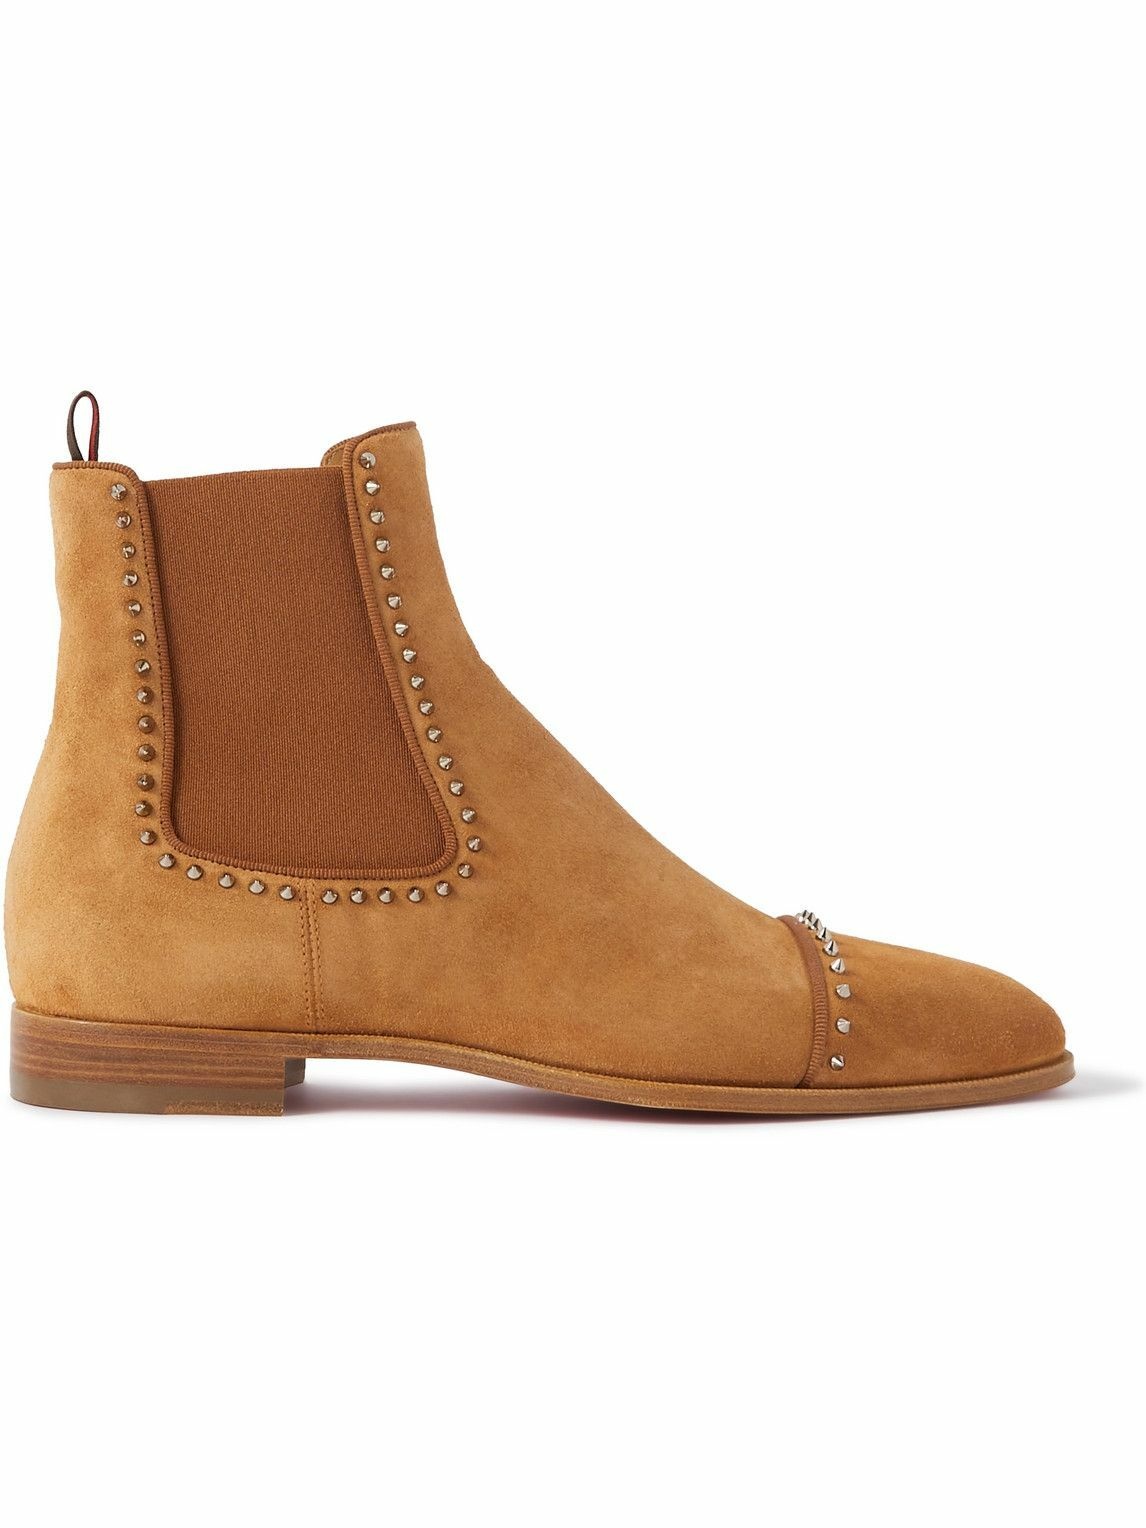 Photo: Christian Louboutin - Spiked Suede Chelsea Boots - Brown